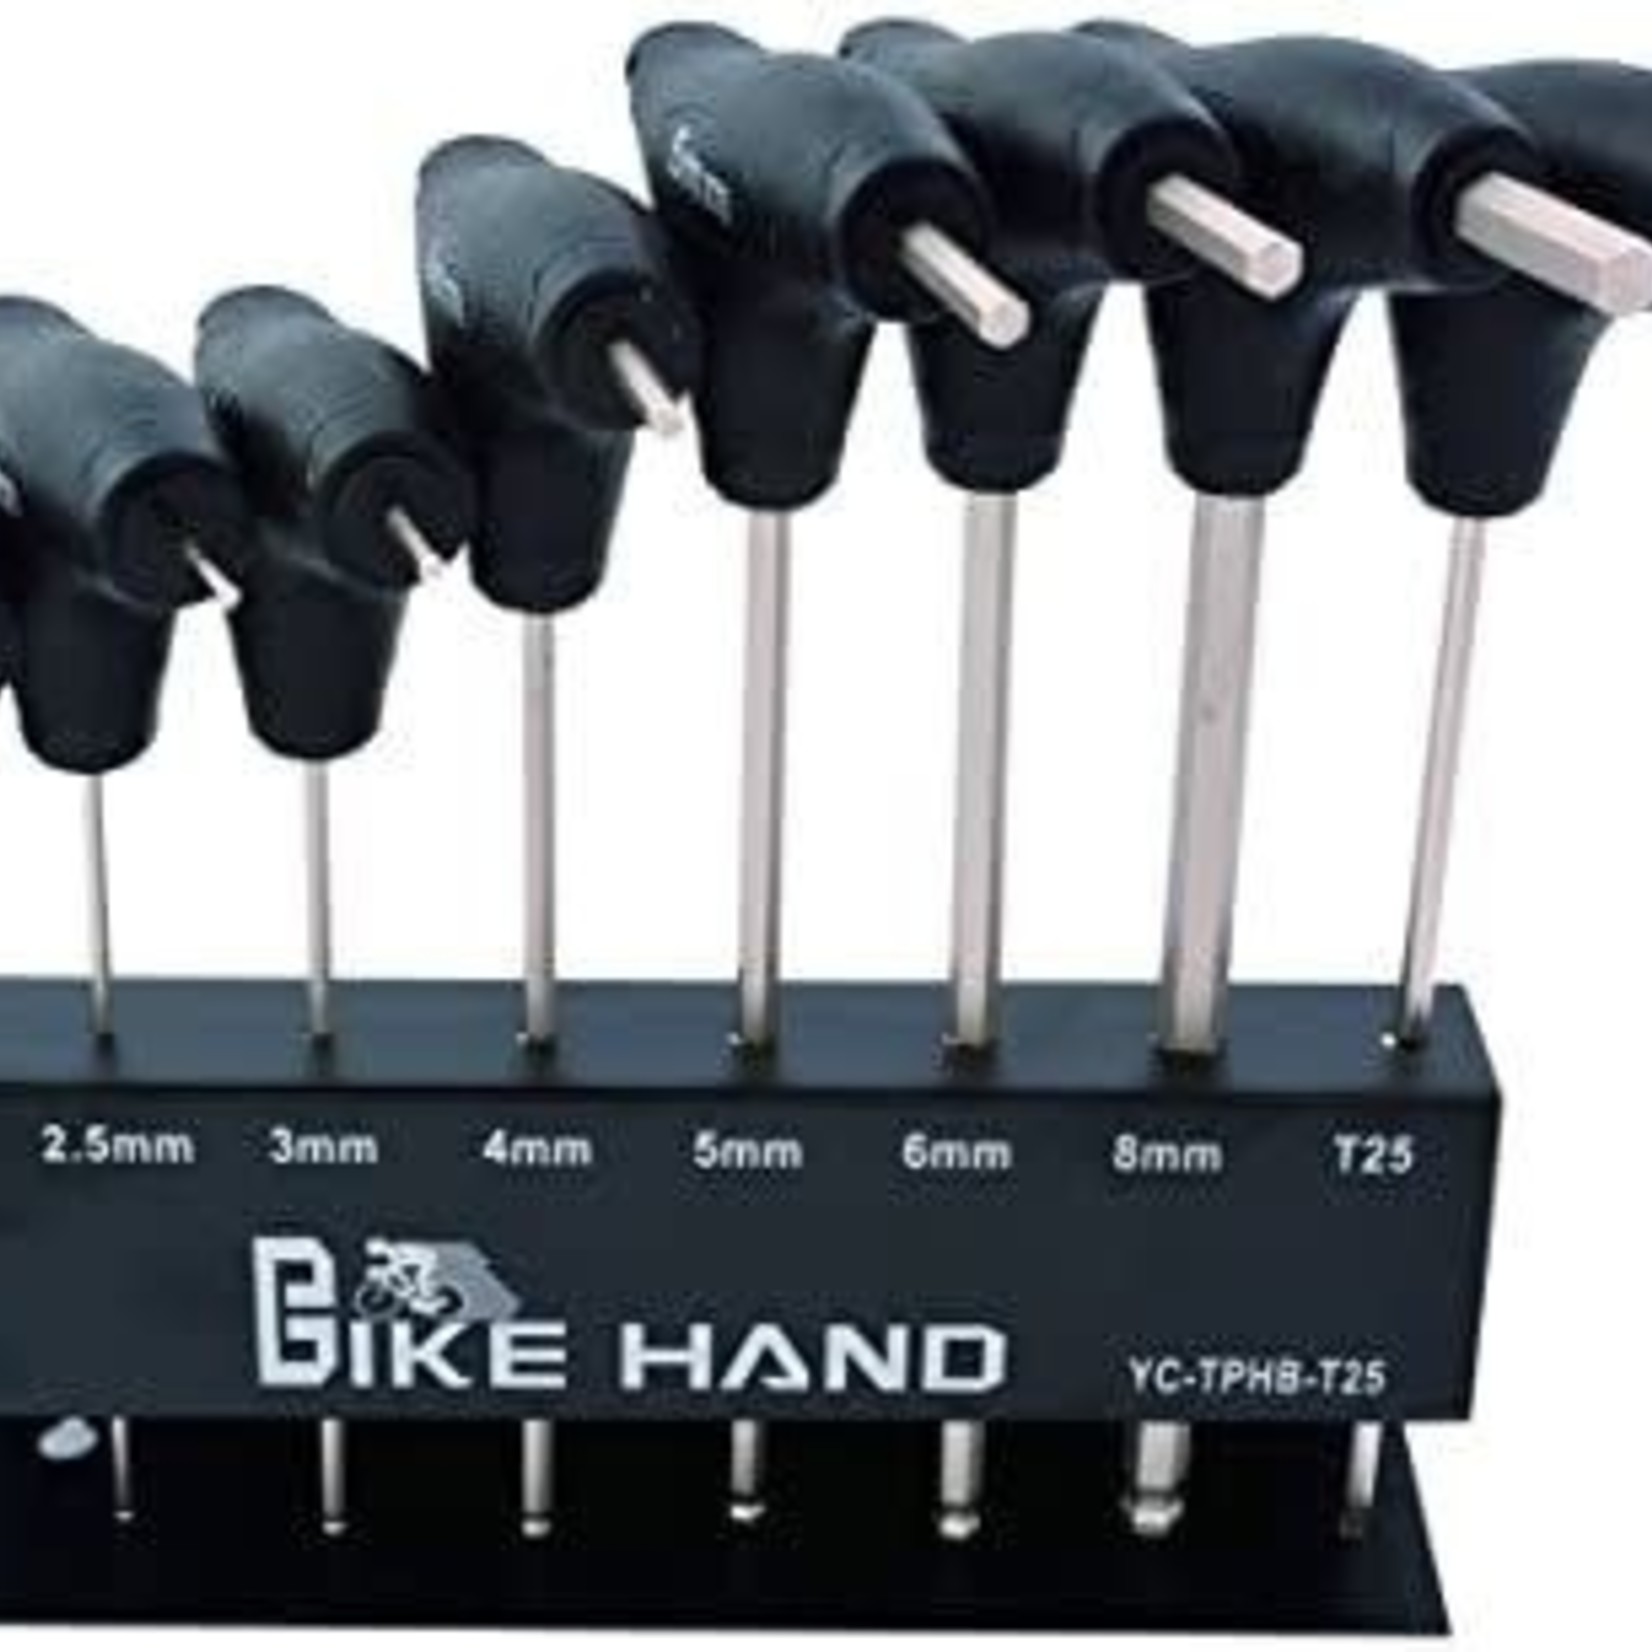 Tool set, twin head wrench (8 Pce set in Storage cradle) 2-8mm hex & T25